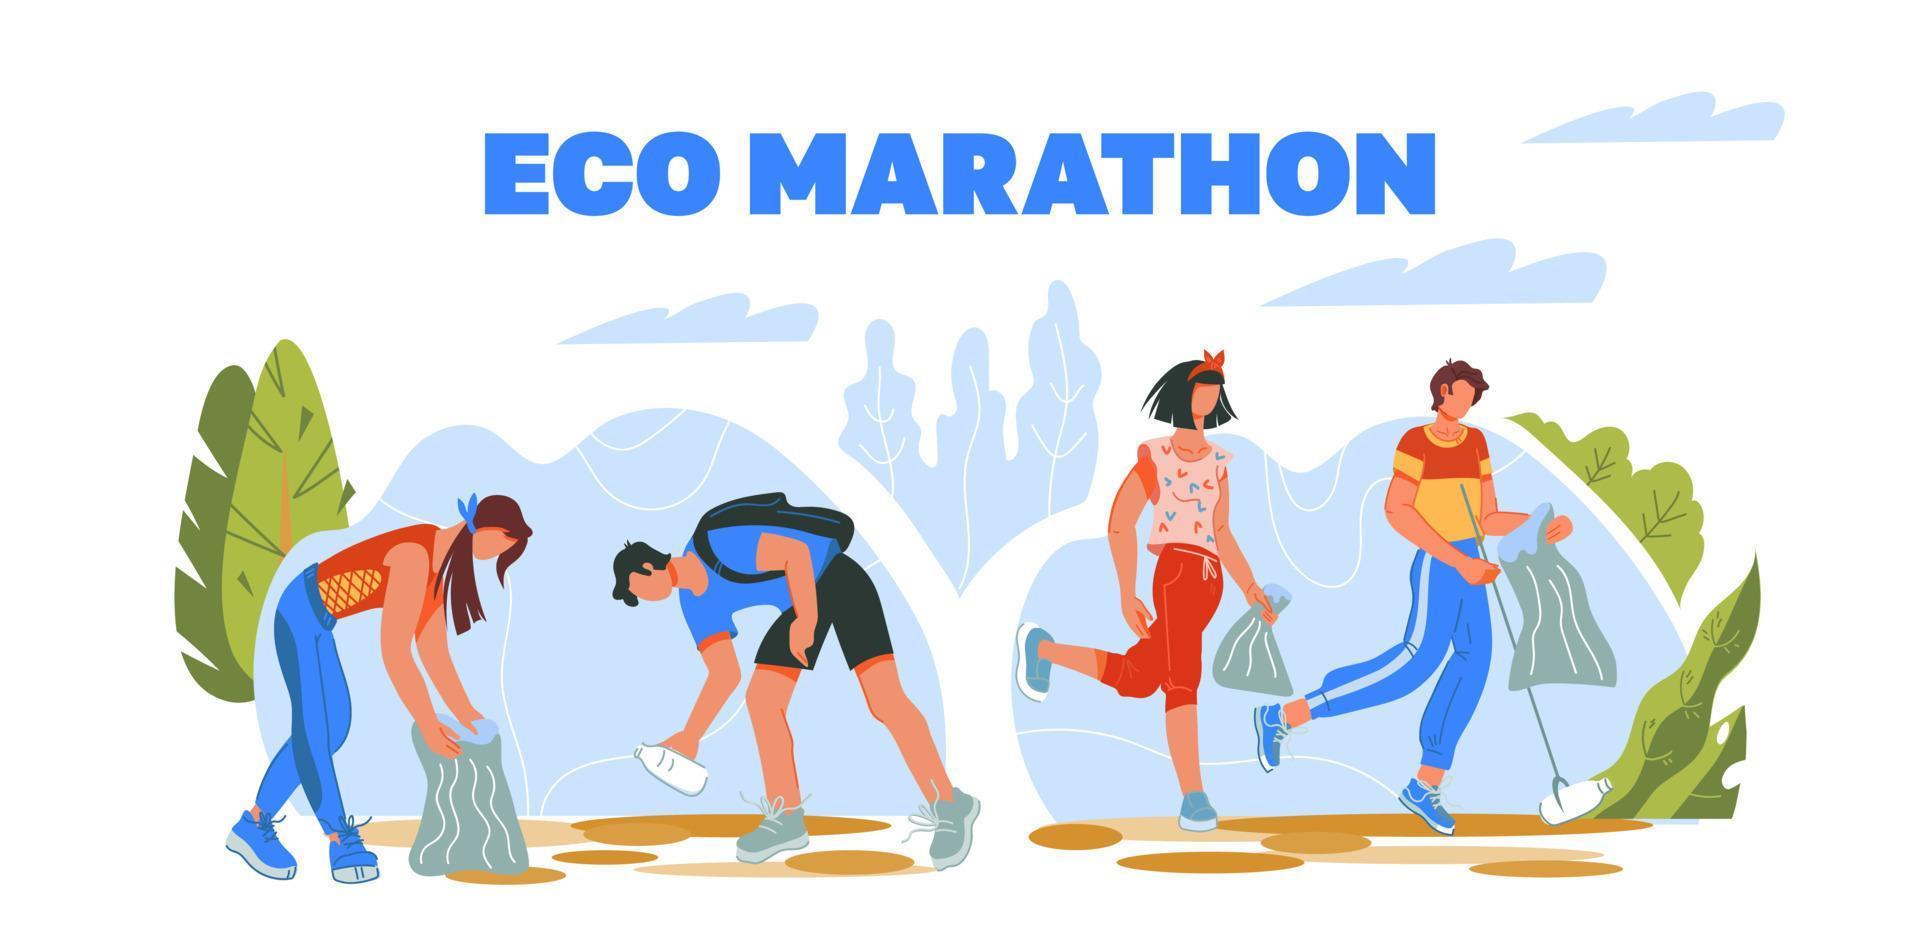 Eco plogging marathon web banner with people running and picking up garbage into litter bags. Environment conservation and cleaning challenge. Flat cartoon vector illustration isolated.